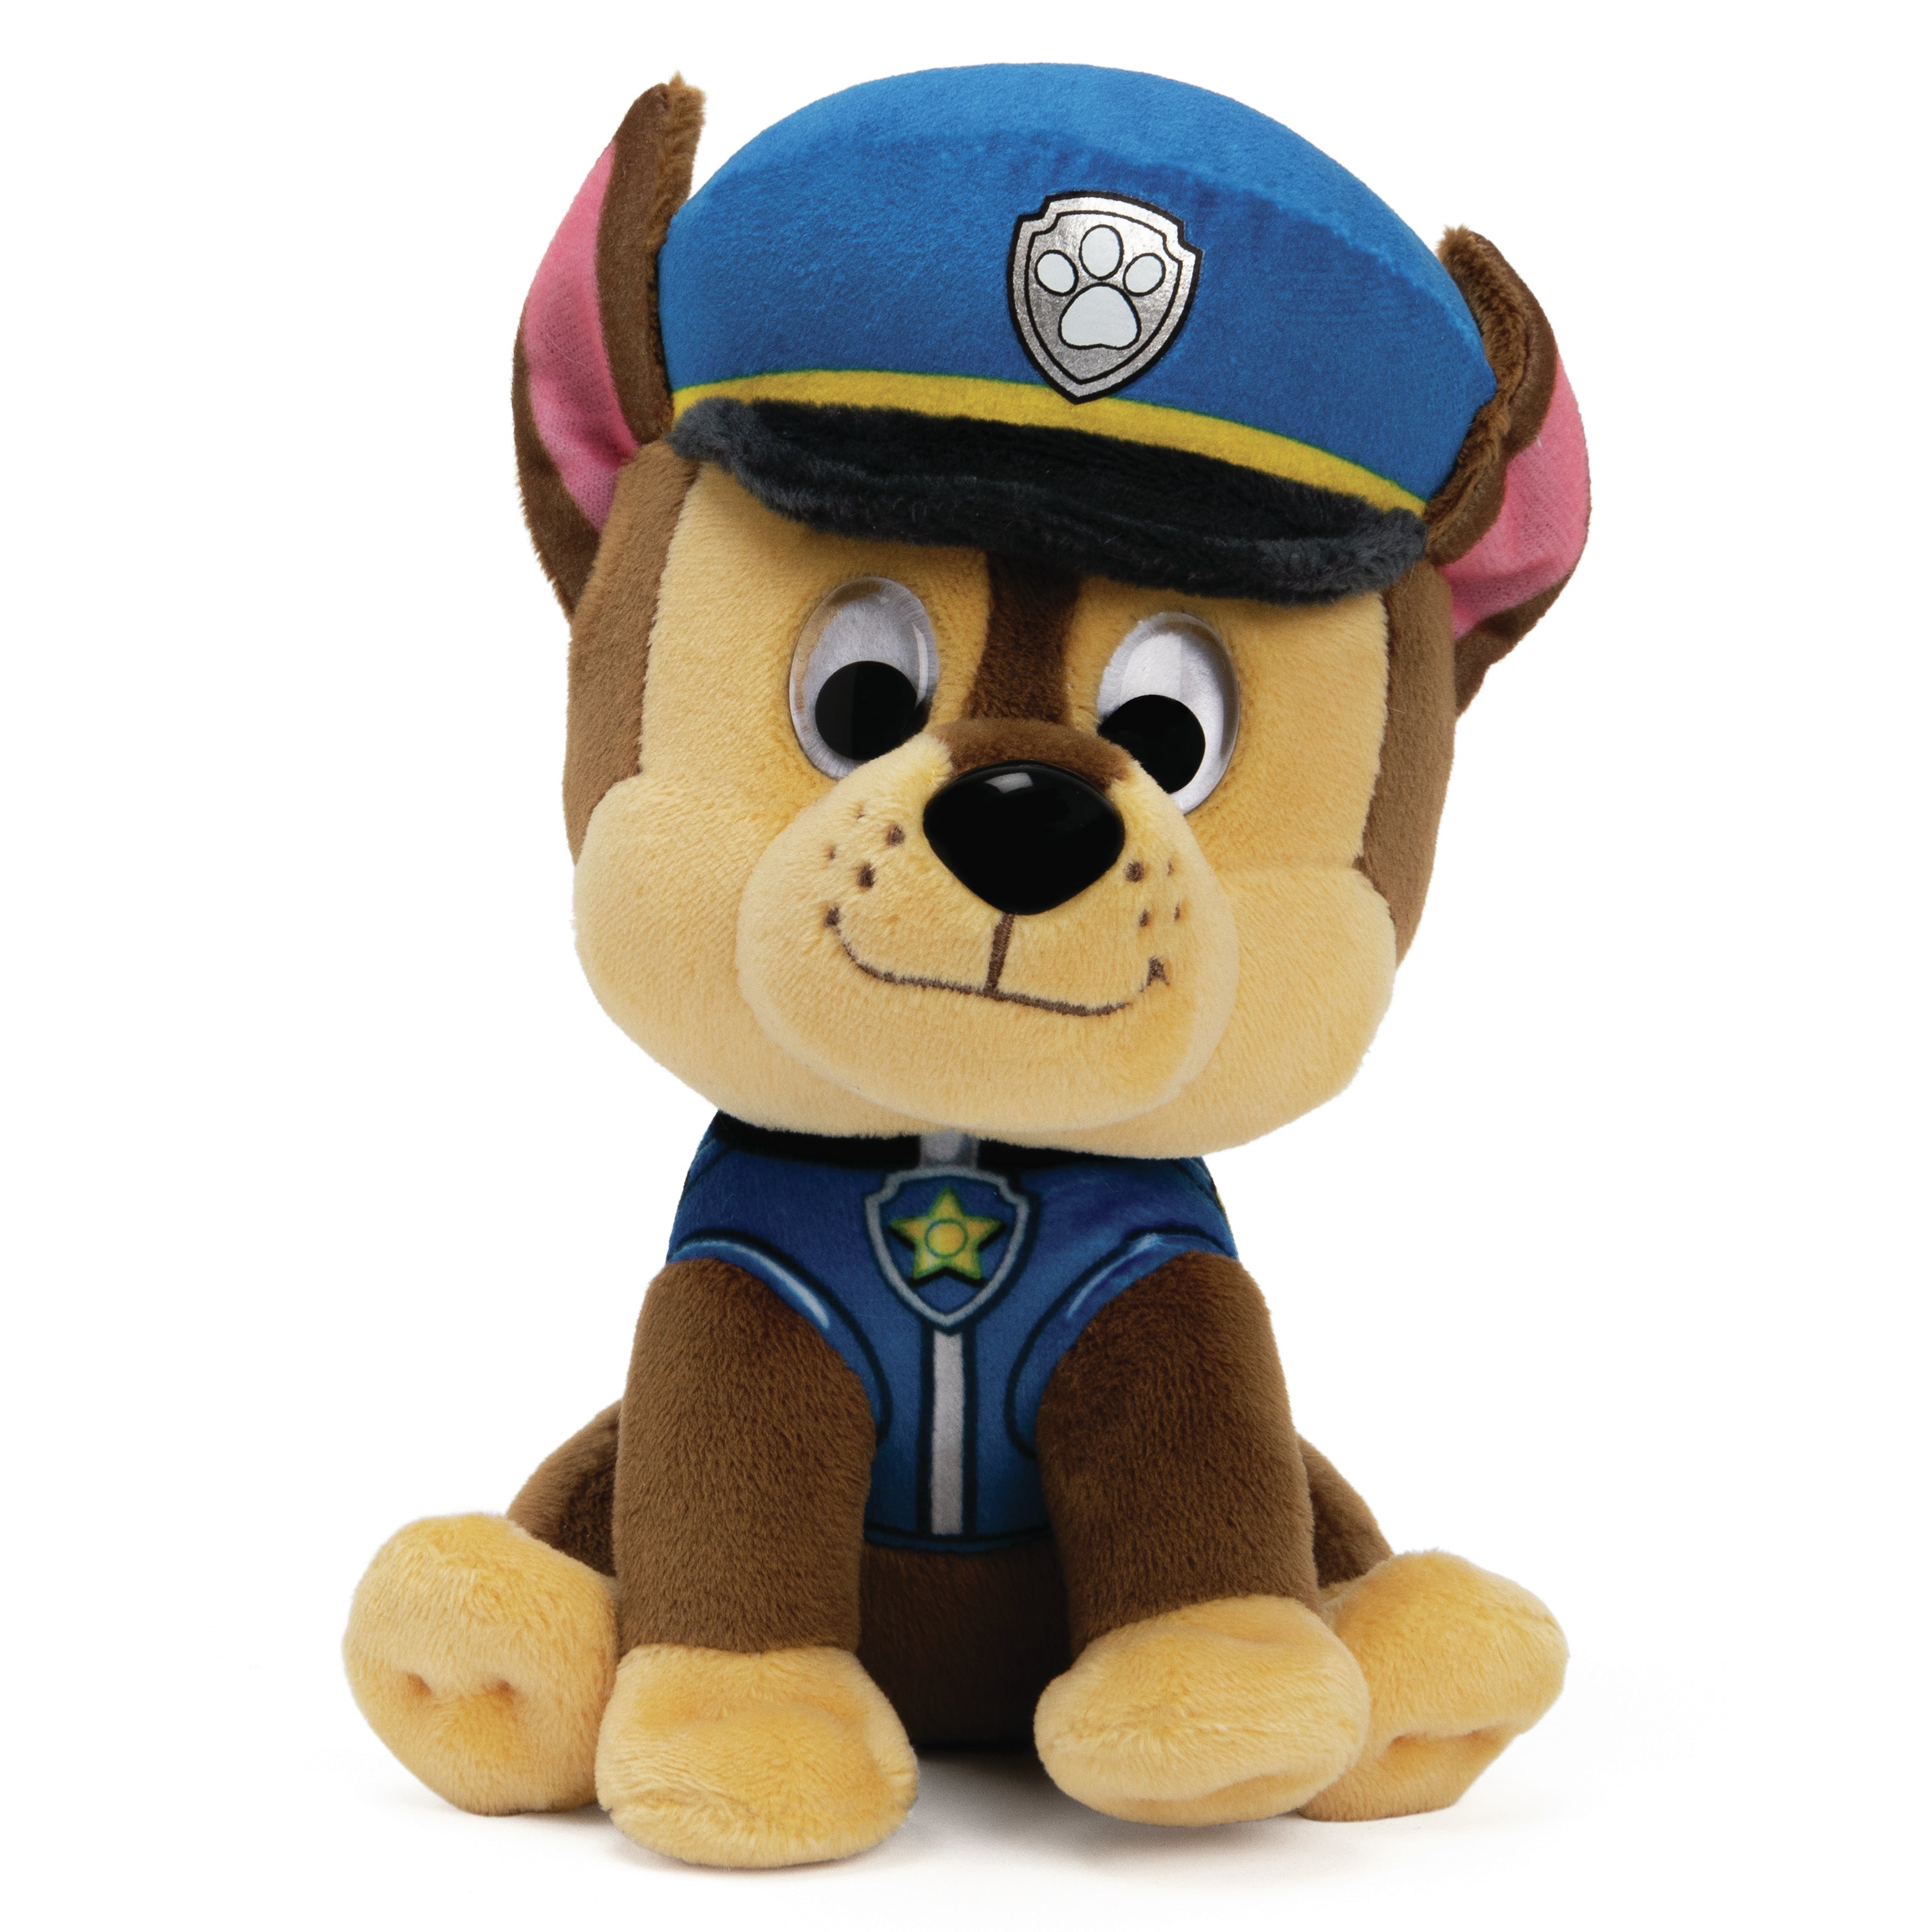 Spin Master - GUND PAW Patrol Plush Toy, Premium Stuffed Animal for Ages 1 and Up, 6”